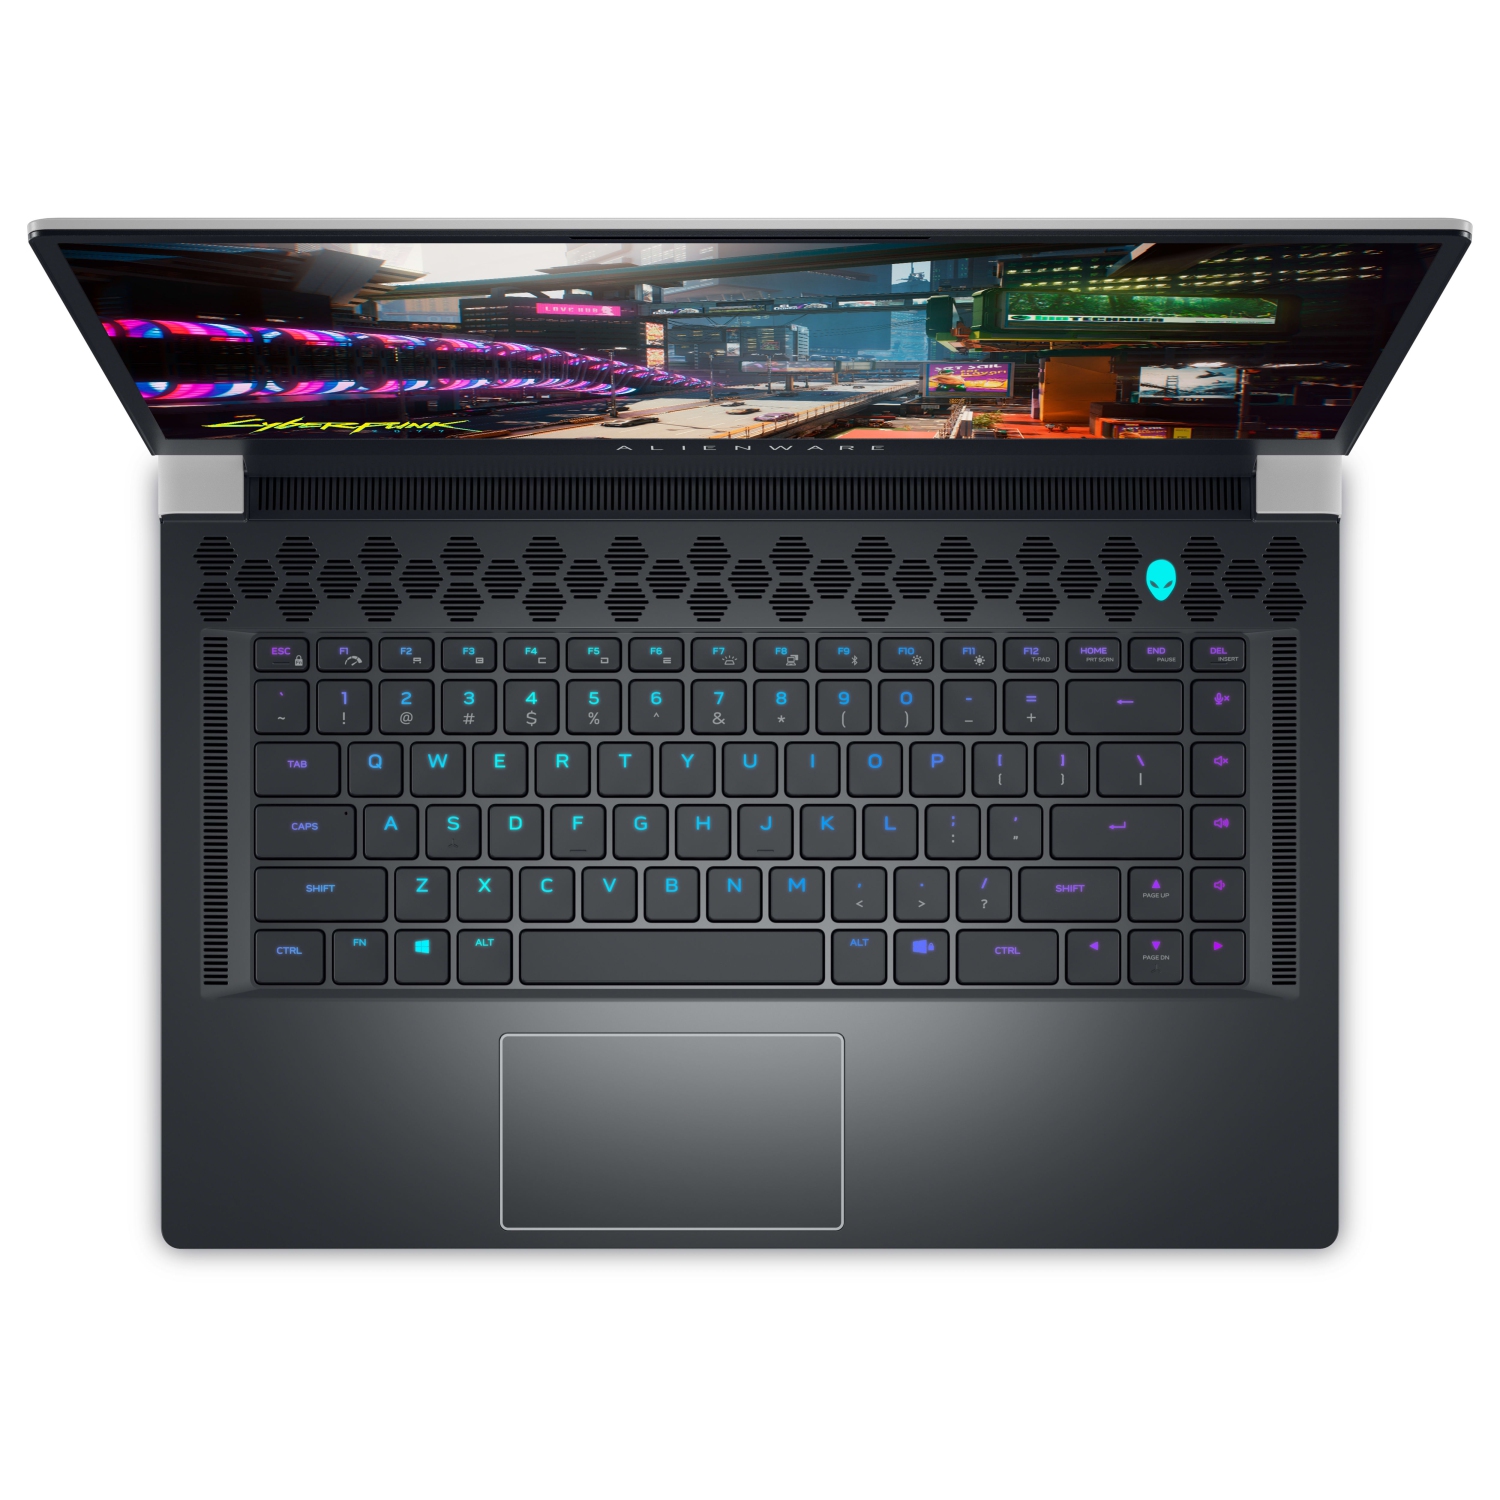 Refurbished (Excellent) – Dell Alienware X15 R2 Gaming Laptop (2022) | 15.6" FHD | Core i9 - 2TB SSD - 32GB RAM - RTX 3080 | 14 Cores @ 5 GHz - 12th Gen CPU - 10GB GDDR6X